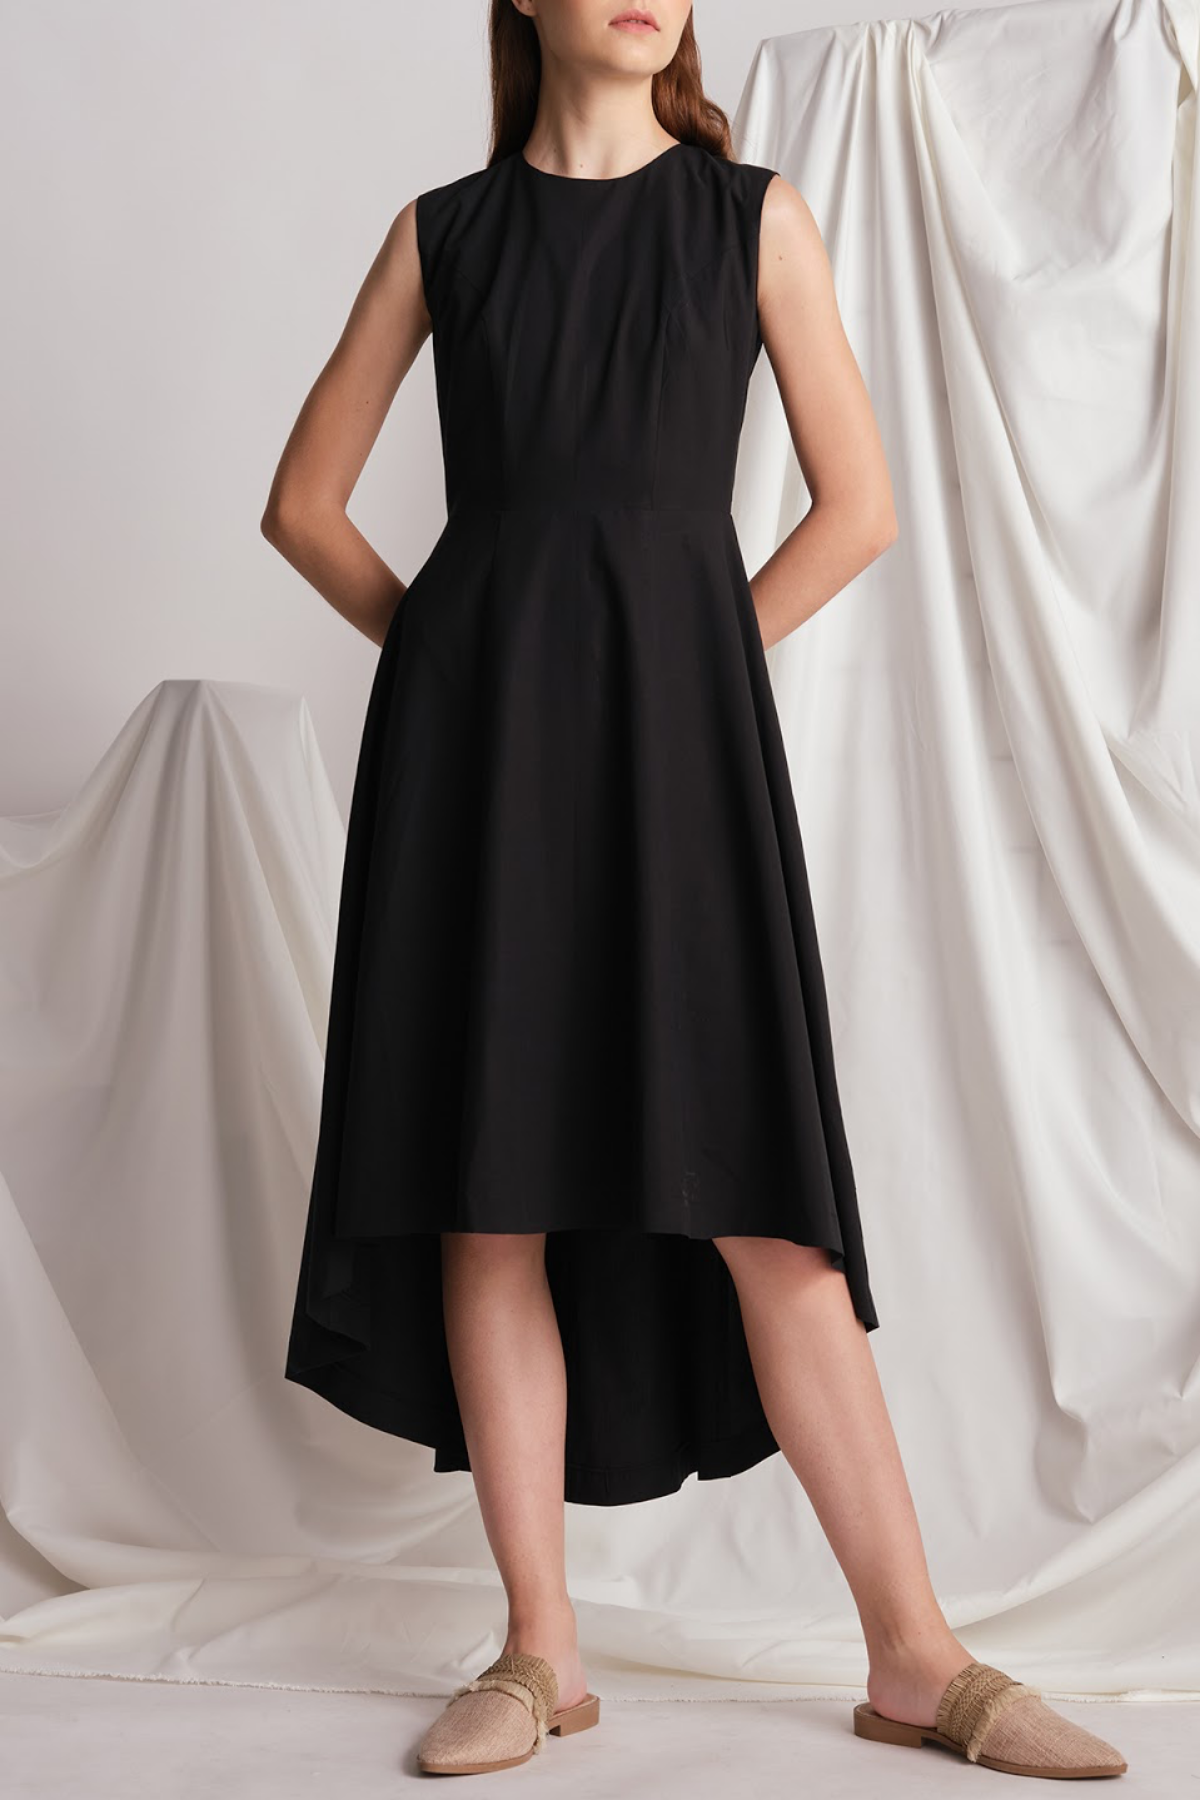 Lily & Lou Alicia Dress in Black, available in ZERRIN